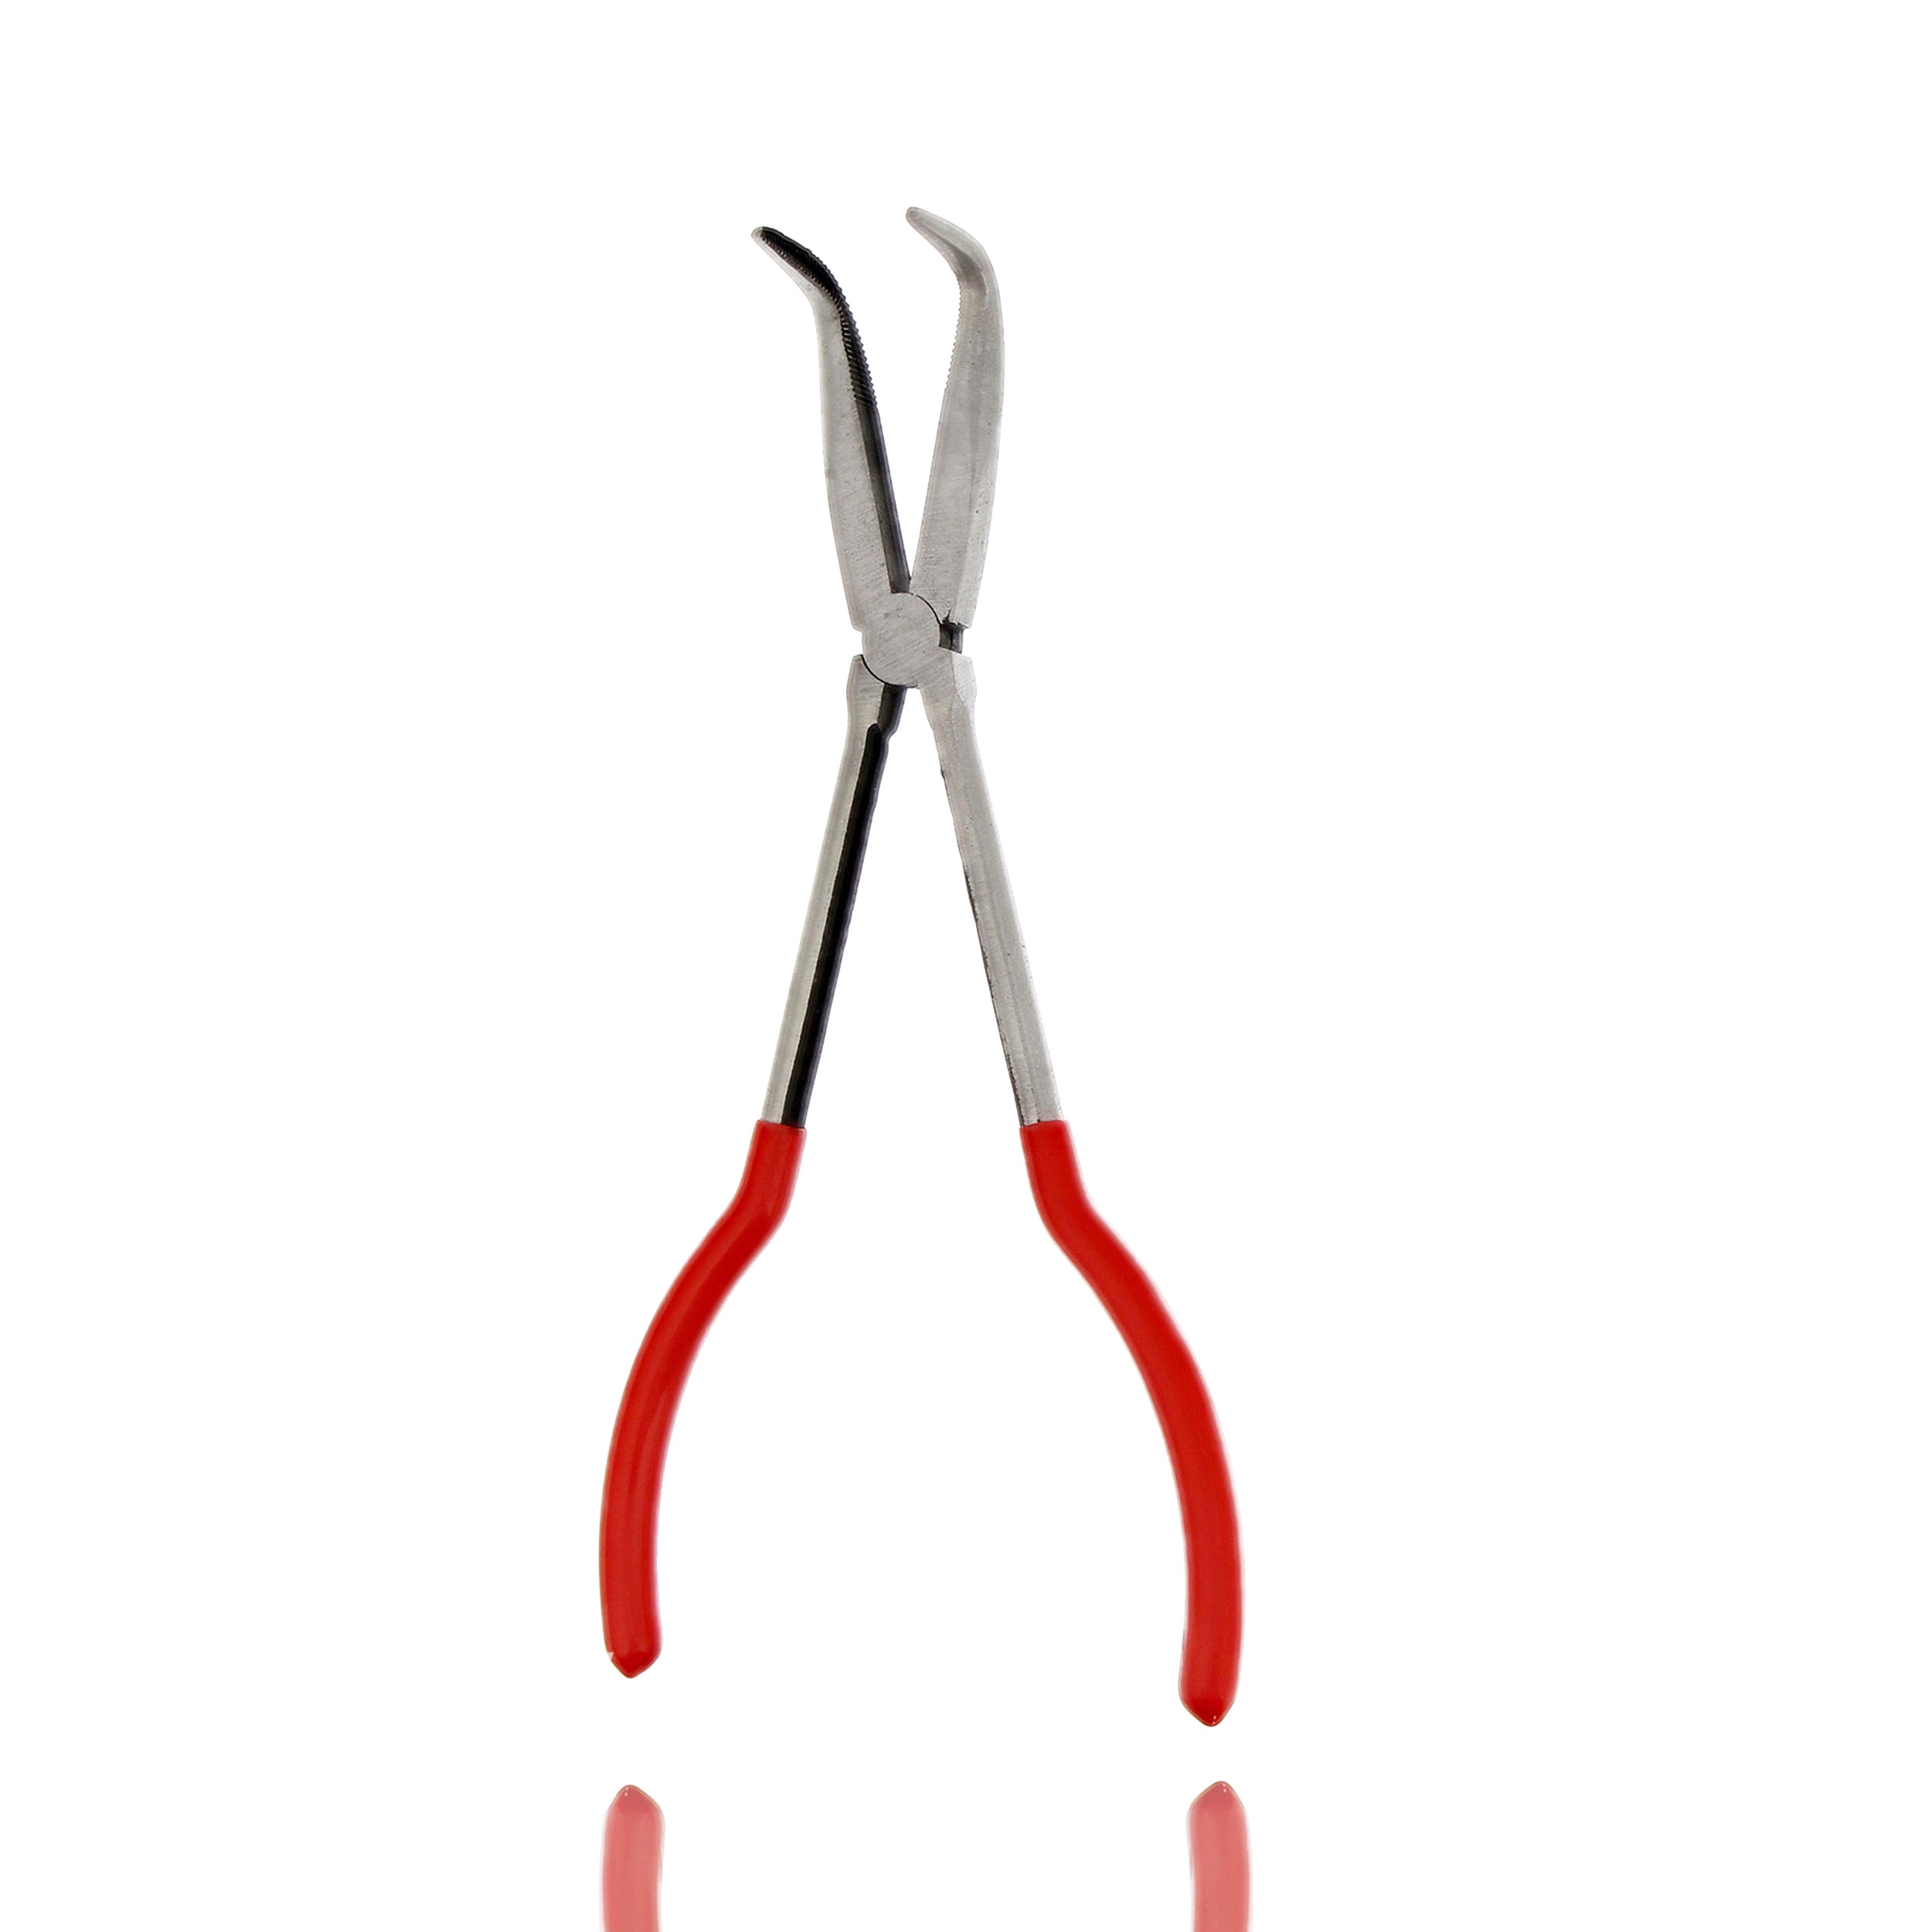 NWS 5.75 Bent Chain Nose Pliers - 45 Degree - MicroFinish